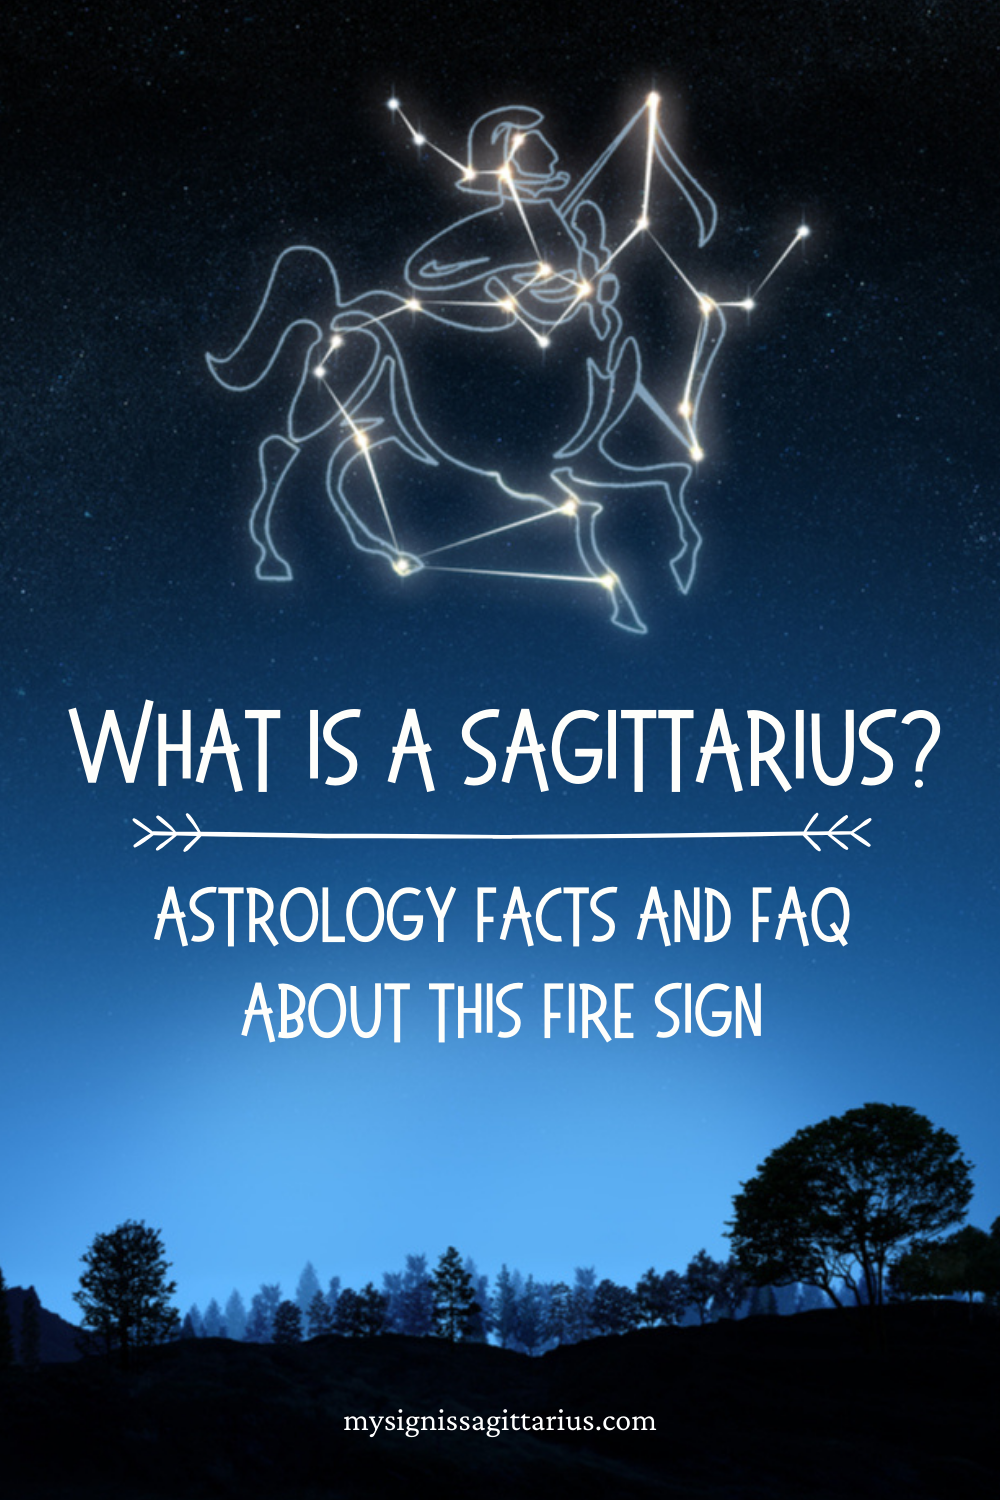 What Is A Sagittarius_ Astrology Facts And FAQ About This Fire Sign, Sagittarius Zodiac Traits #sagittarius #sagittariussign #astrology #zodiac